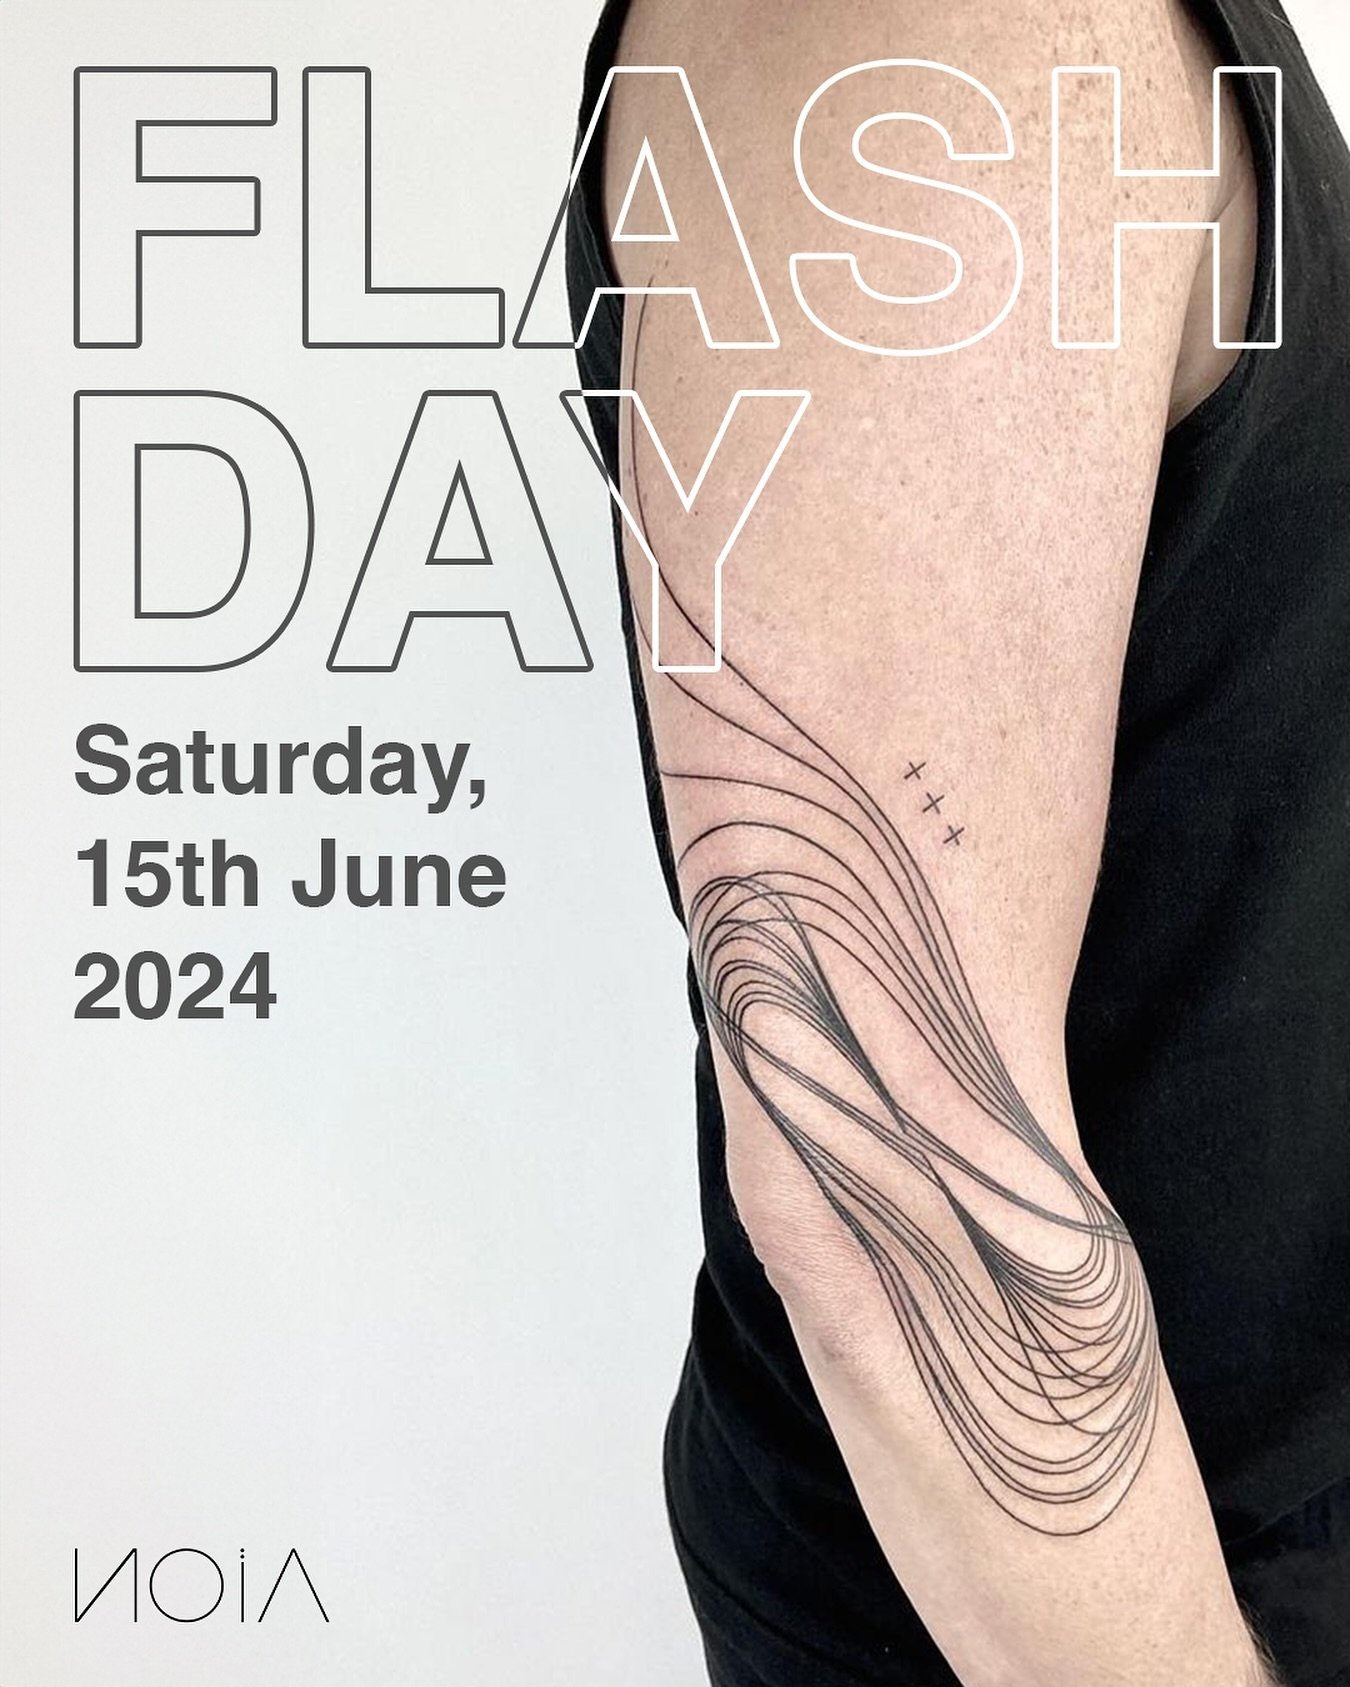 FLASH DAY! 

We are happy to announce our first flash day in a long time! 

Date: June 15, 2024 

Stay tuned for our artist announcement, the available designs and the booking informations! 

Save the date 🤍

#noiiaberlin #art #berlin #berlinart #ta